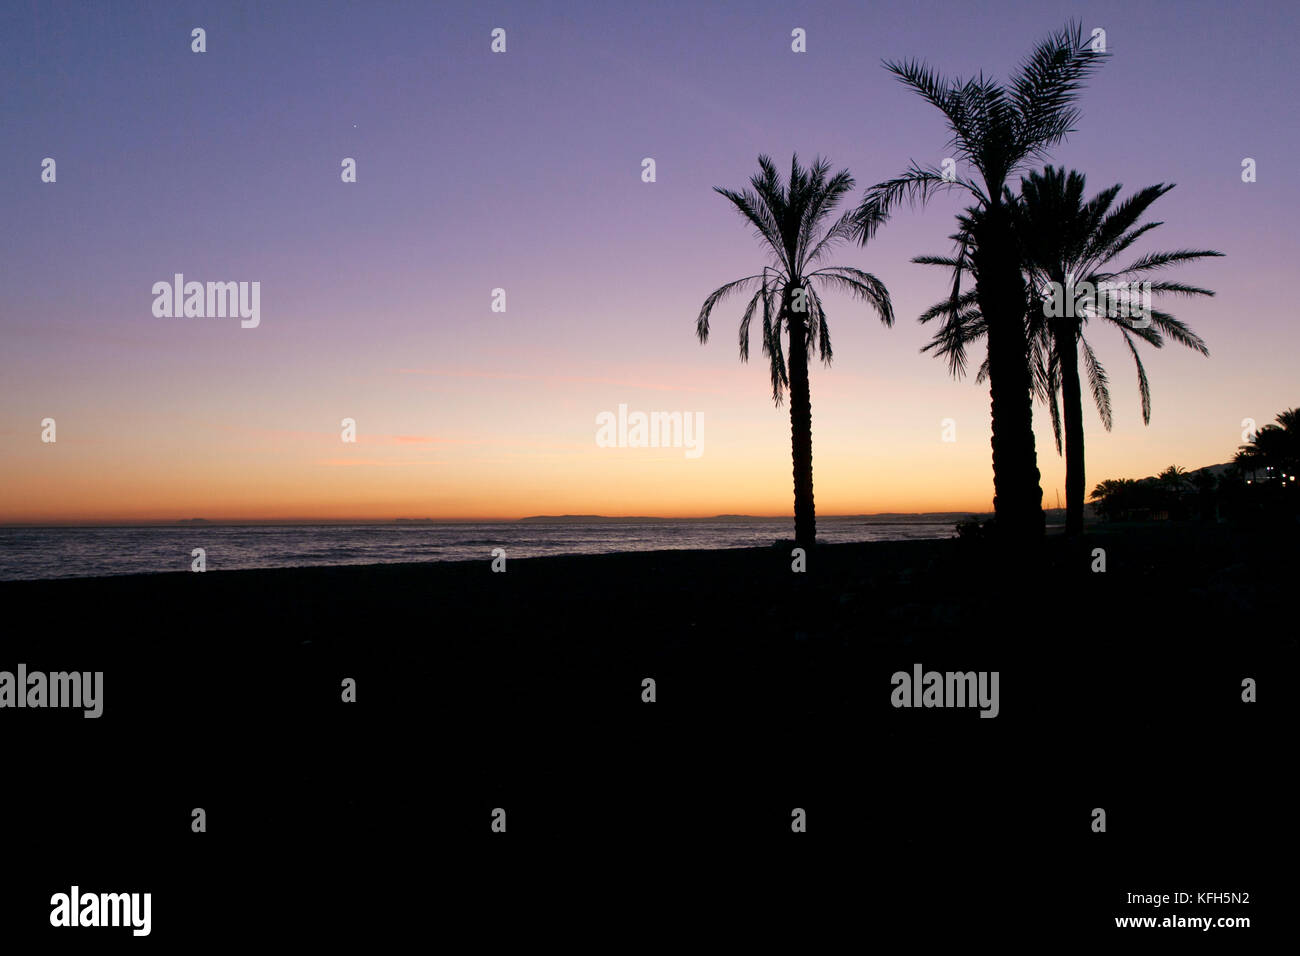 Spectacular sunset view over Marbella sea with palm trees back light silhouettes. Stock Photo